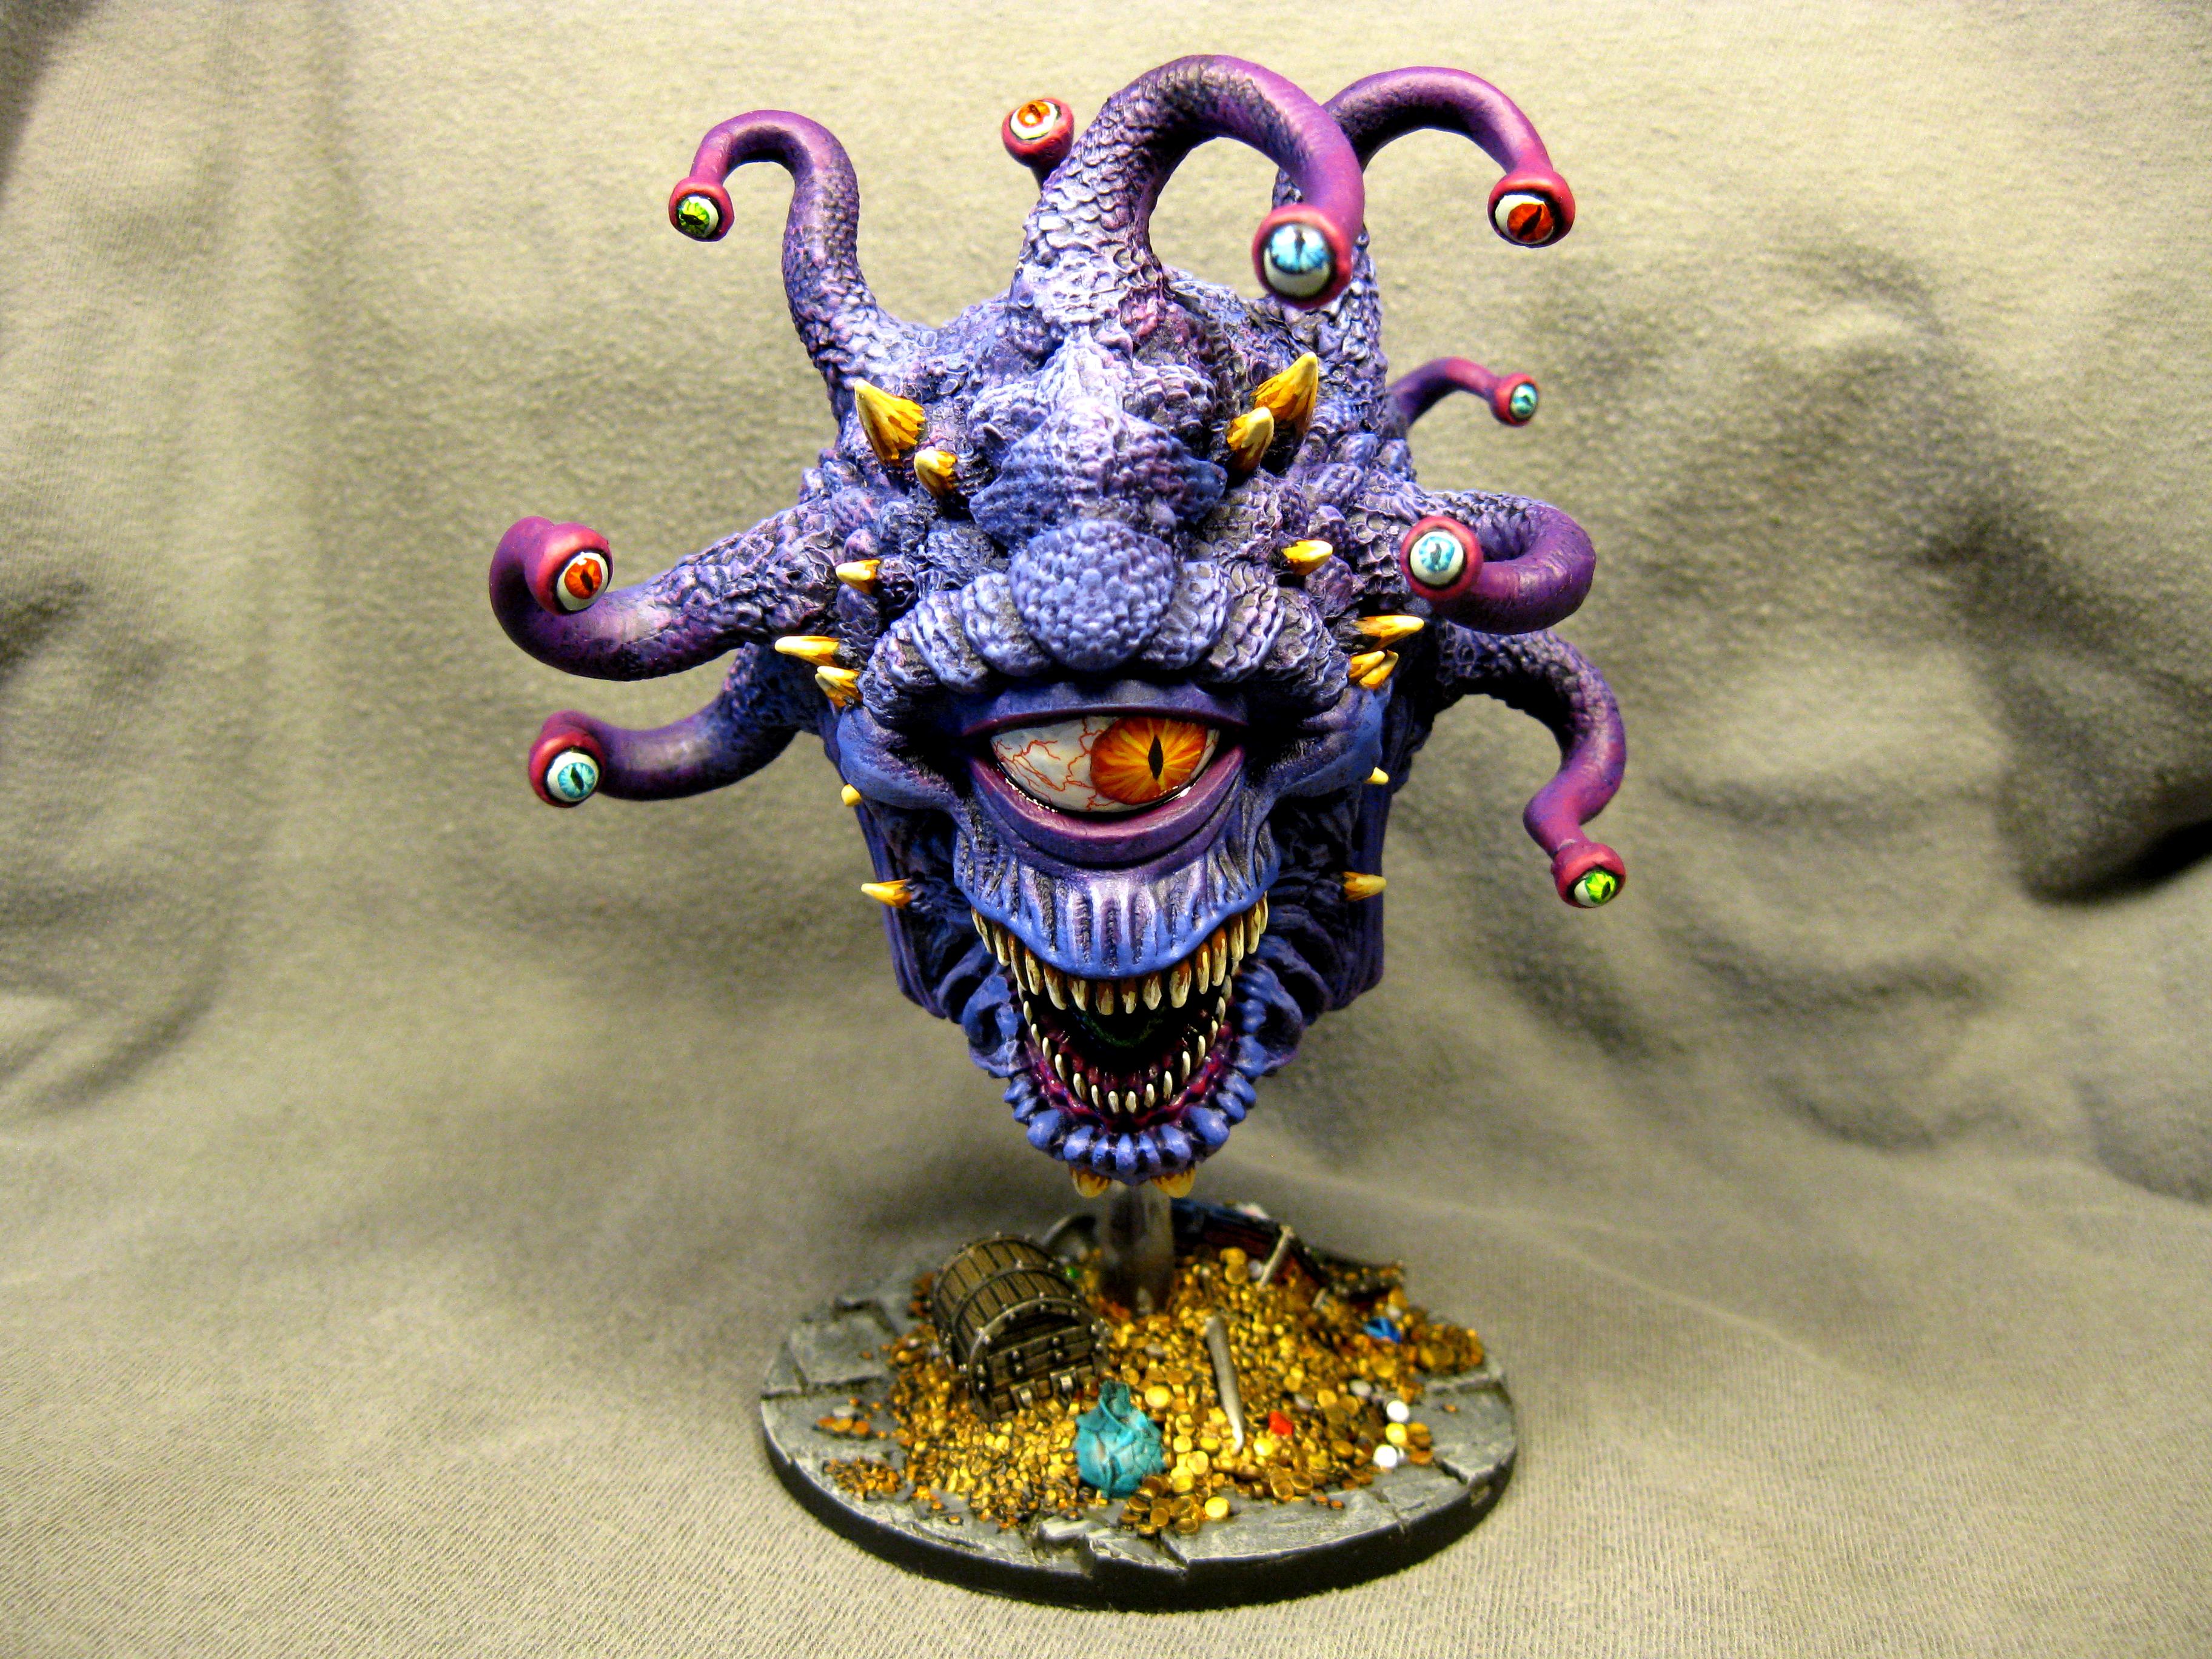 Beholder, Beholder Eye Tyrant, Beholder Tyrant, Carrero Arts, Carreroarts, Dungeons &amp; Dragons, Dungeons And Dragons, Rpg